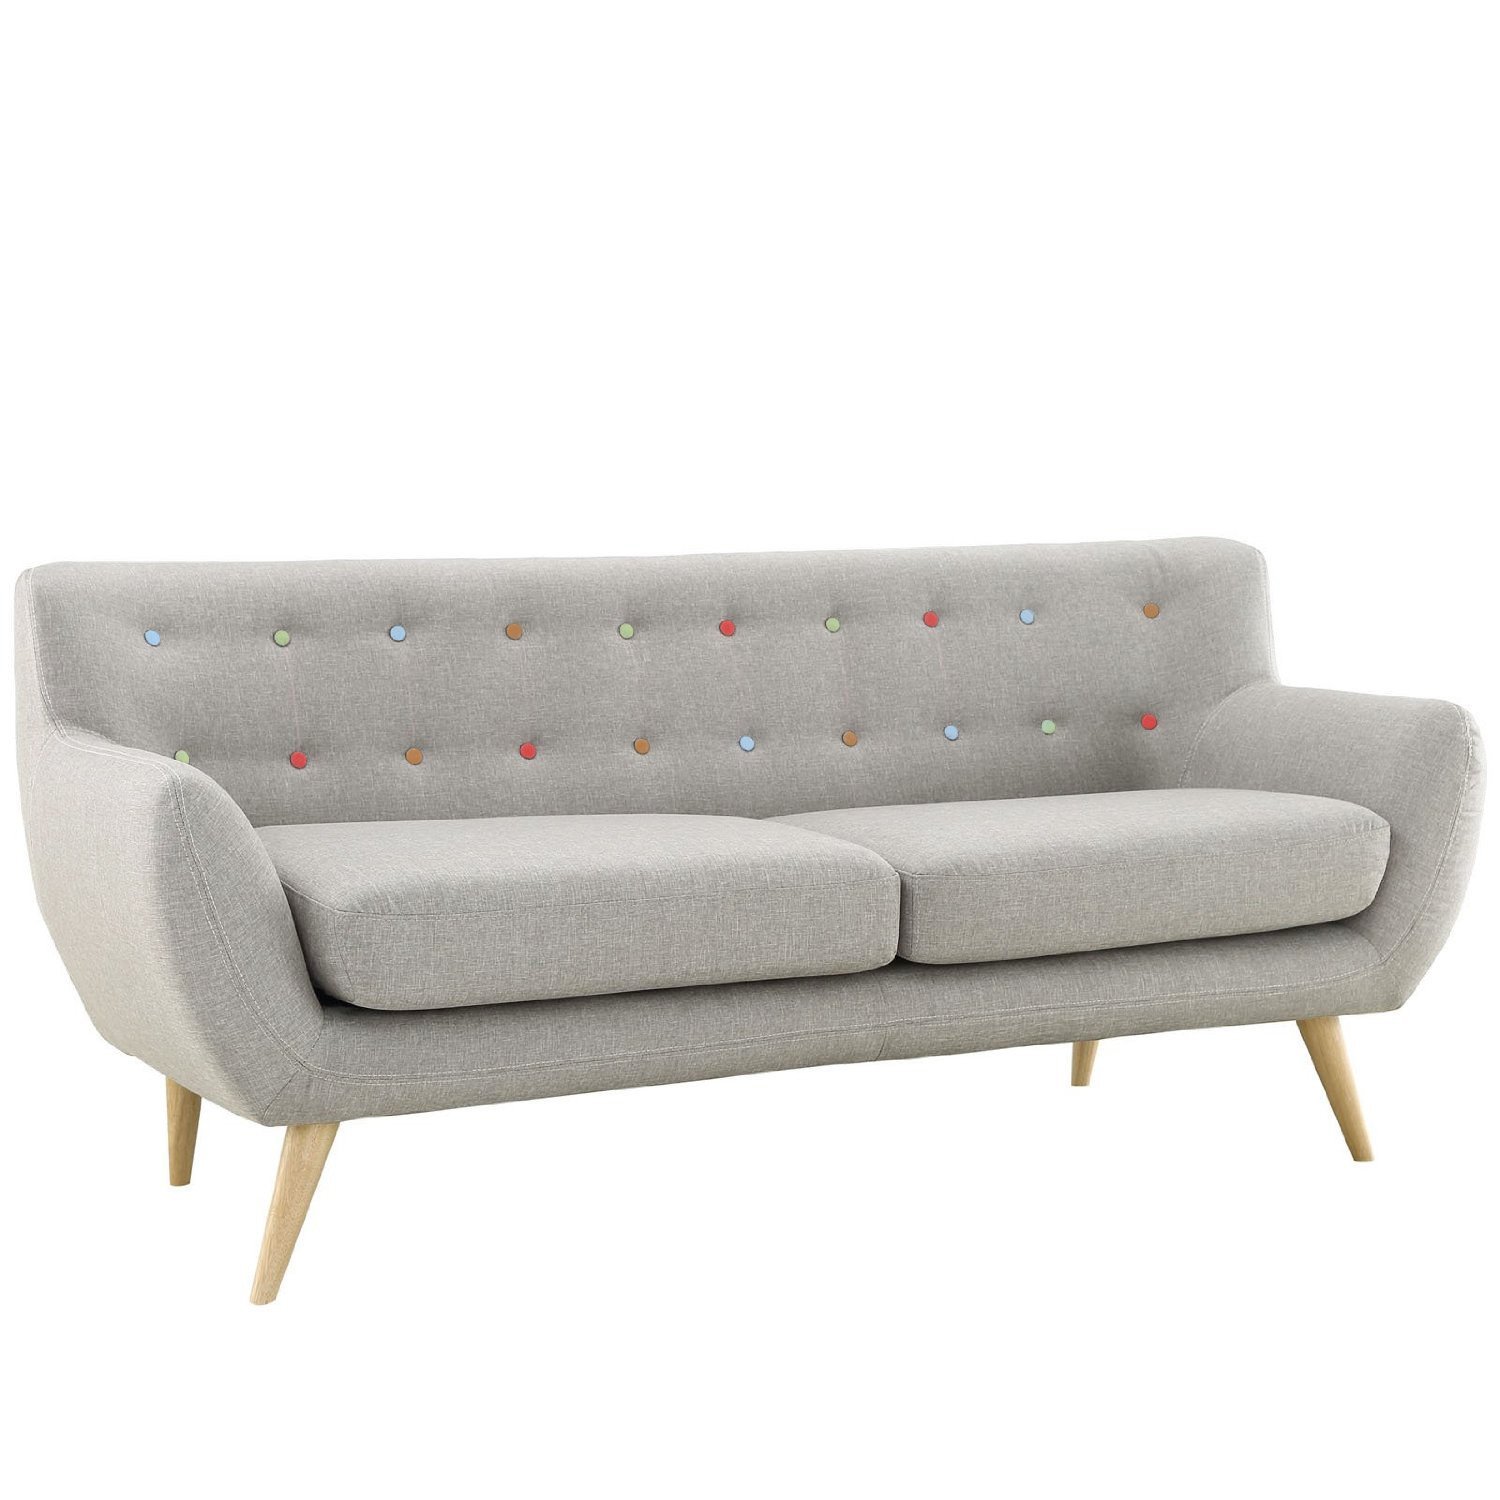 Mid Century Modern Style Sofa / Love Seat Red, Grey, Yellow, Blue - 2 Seat, 3 Seat (Grey w/ Assorted Colored Buttons, 2 Seater)